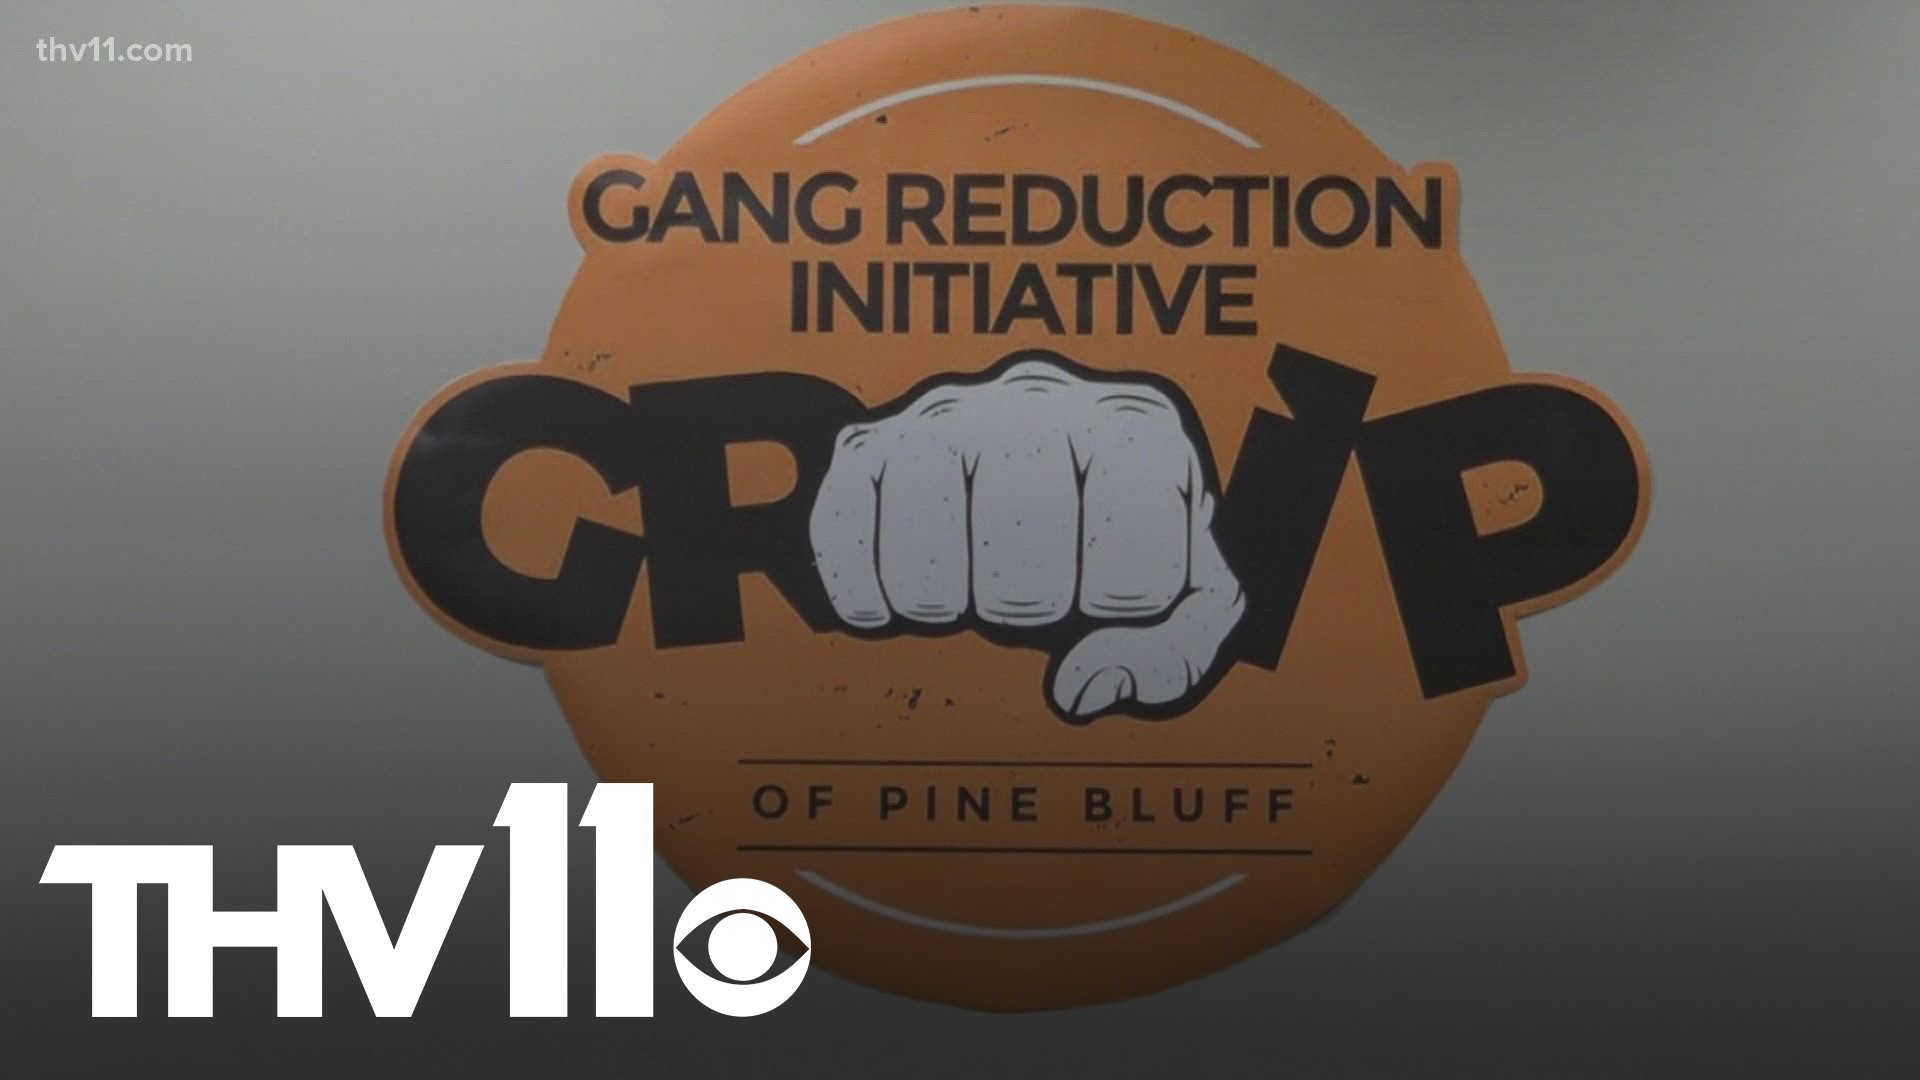 Reducing gang activity has been a top priority for officials and community leaders in Pine Bluff, and after months of planning, they're launching their new program.